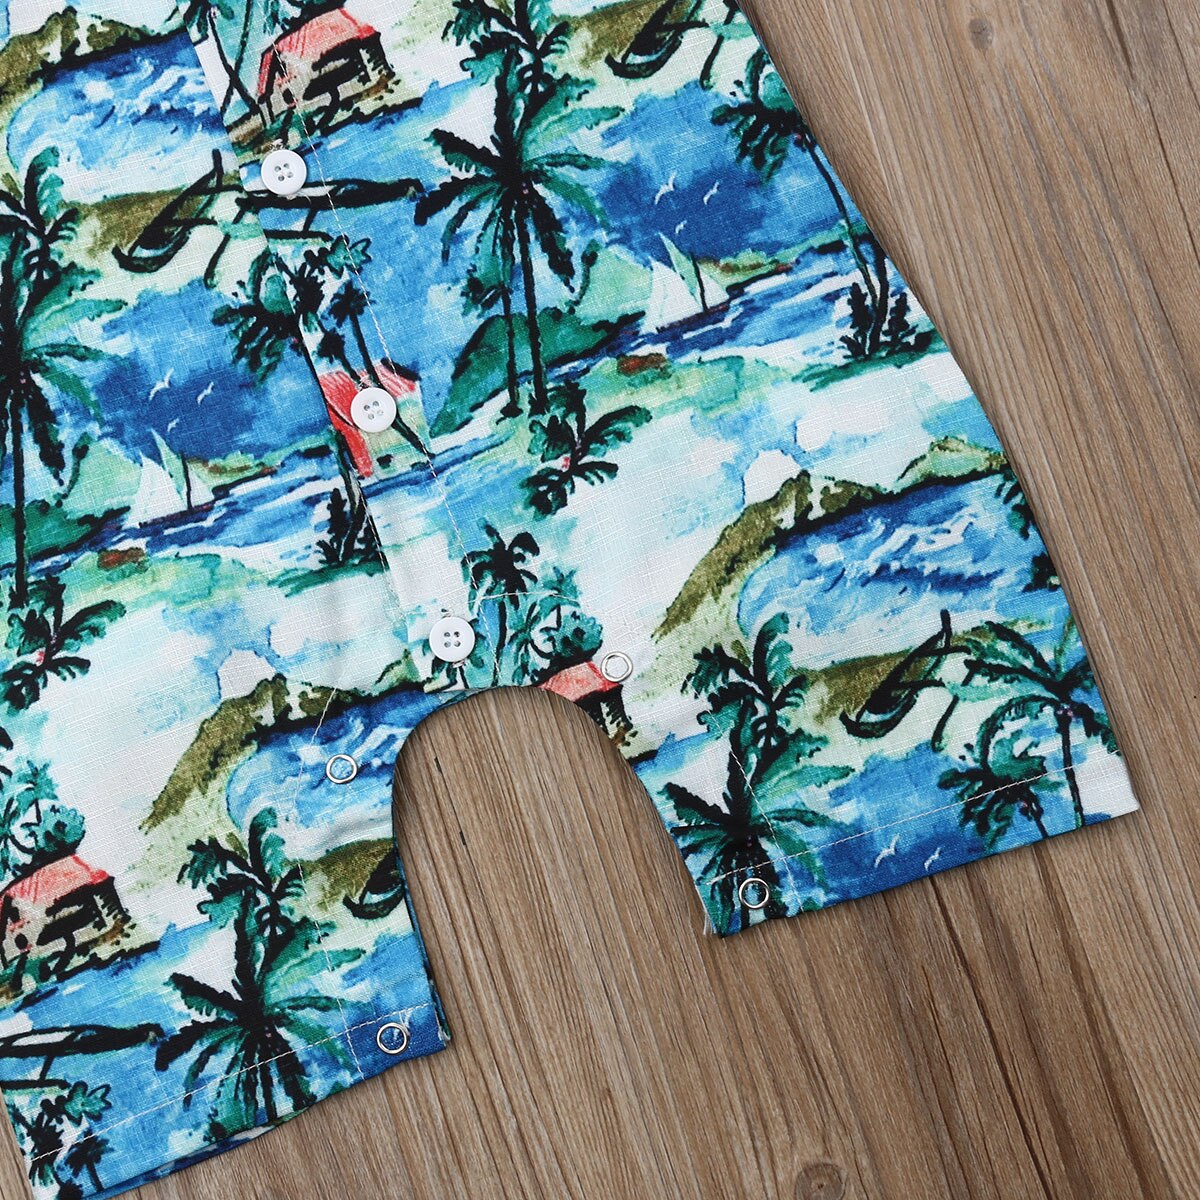 Hot-sale-Newborn-Baby-Boys-Romper-Jumpsuit-Short-Sleeve-Hawaii-Long-Pants-Clothes-Outfits-Summer-baby-5